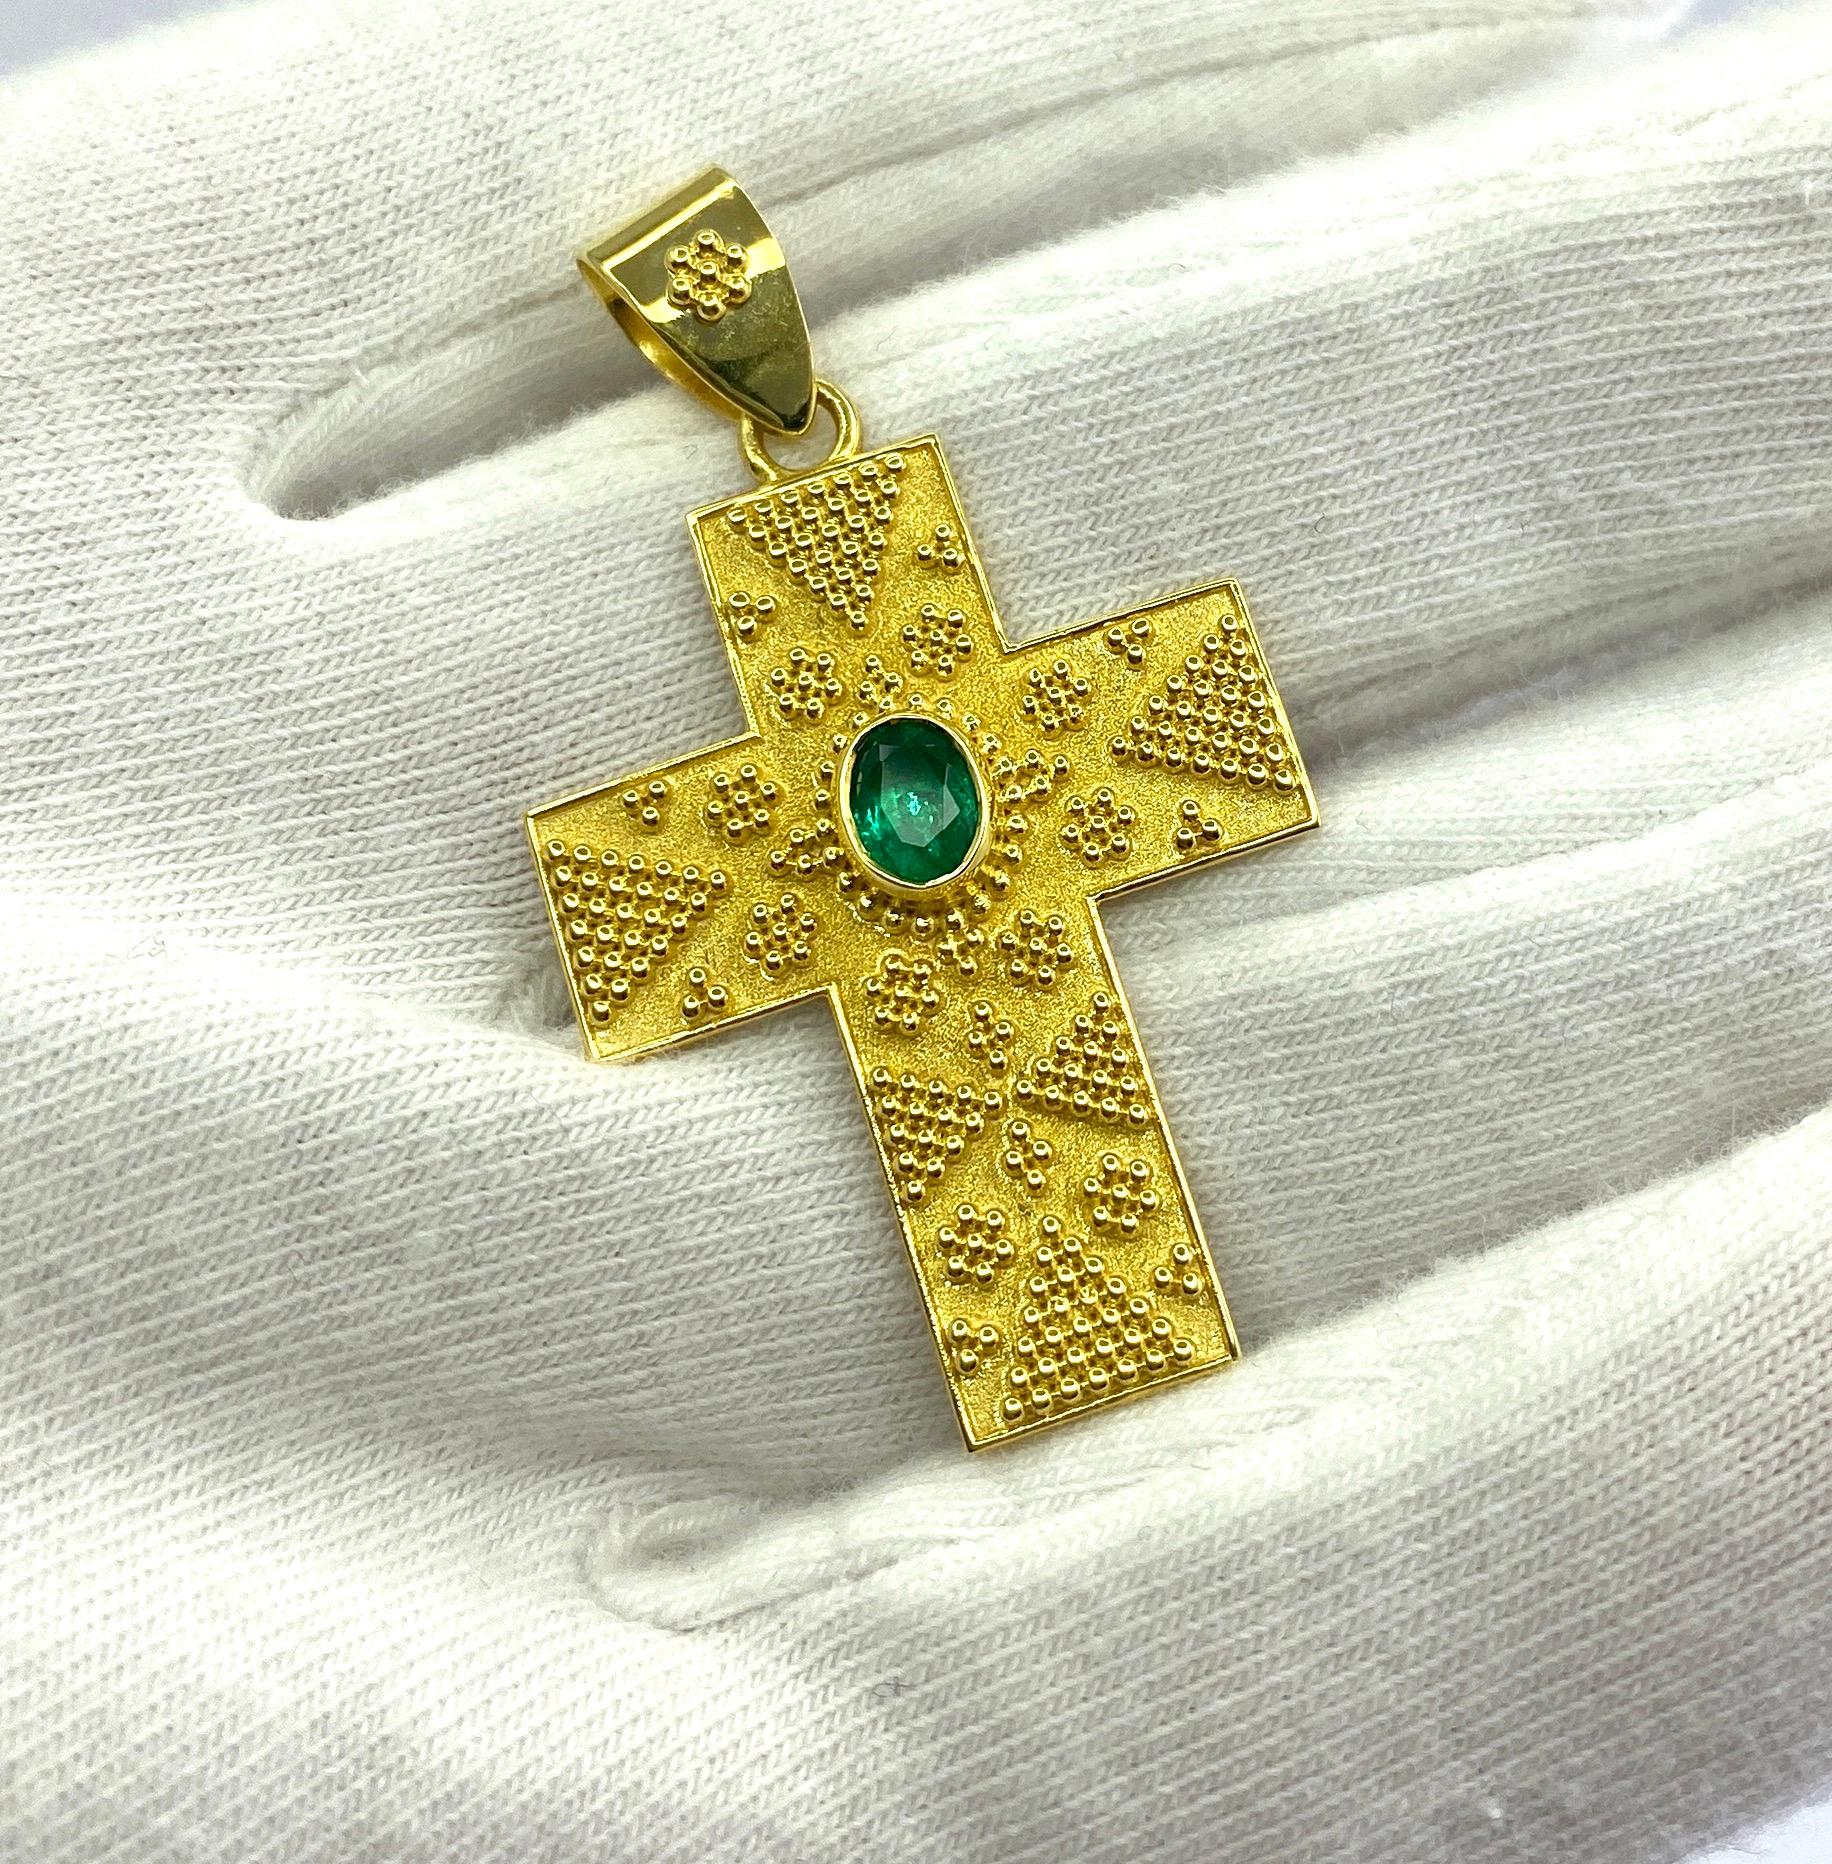 This S.Georgios Designer Byzantine Style Cross is handmade from solid 18 Karat Yellow Gold. It is heavily decorated with granulation work and features 0.30 Carat oval shape Emerald on the velvet background. This art piece is made in outstanding